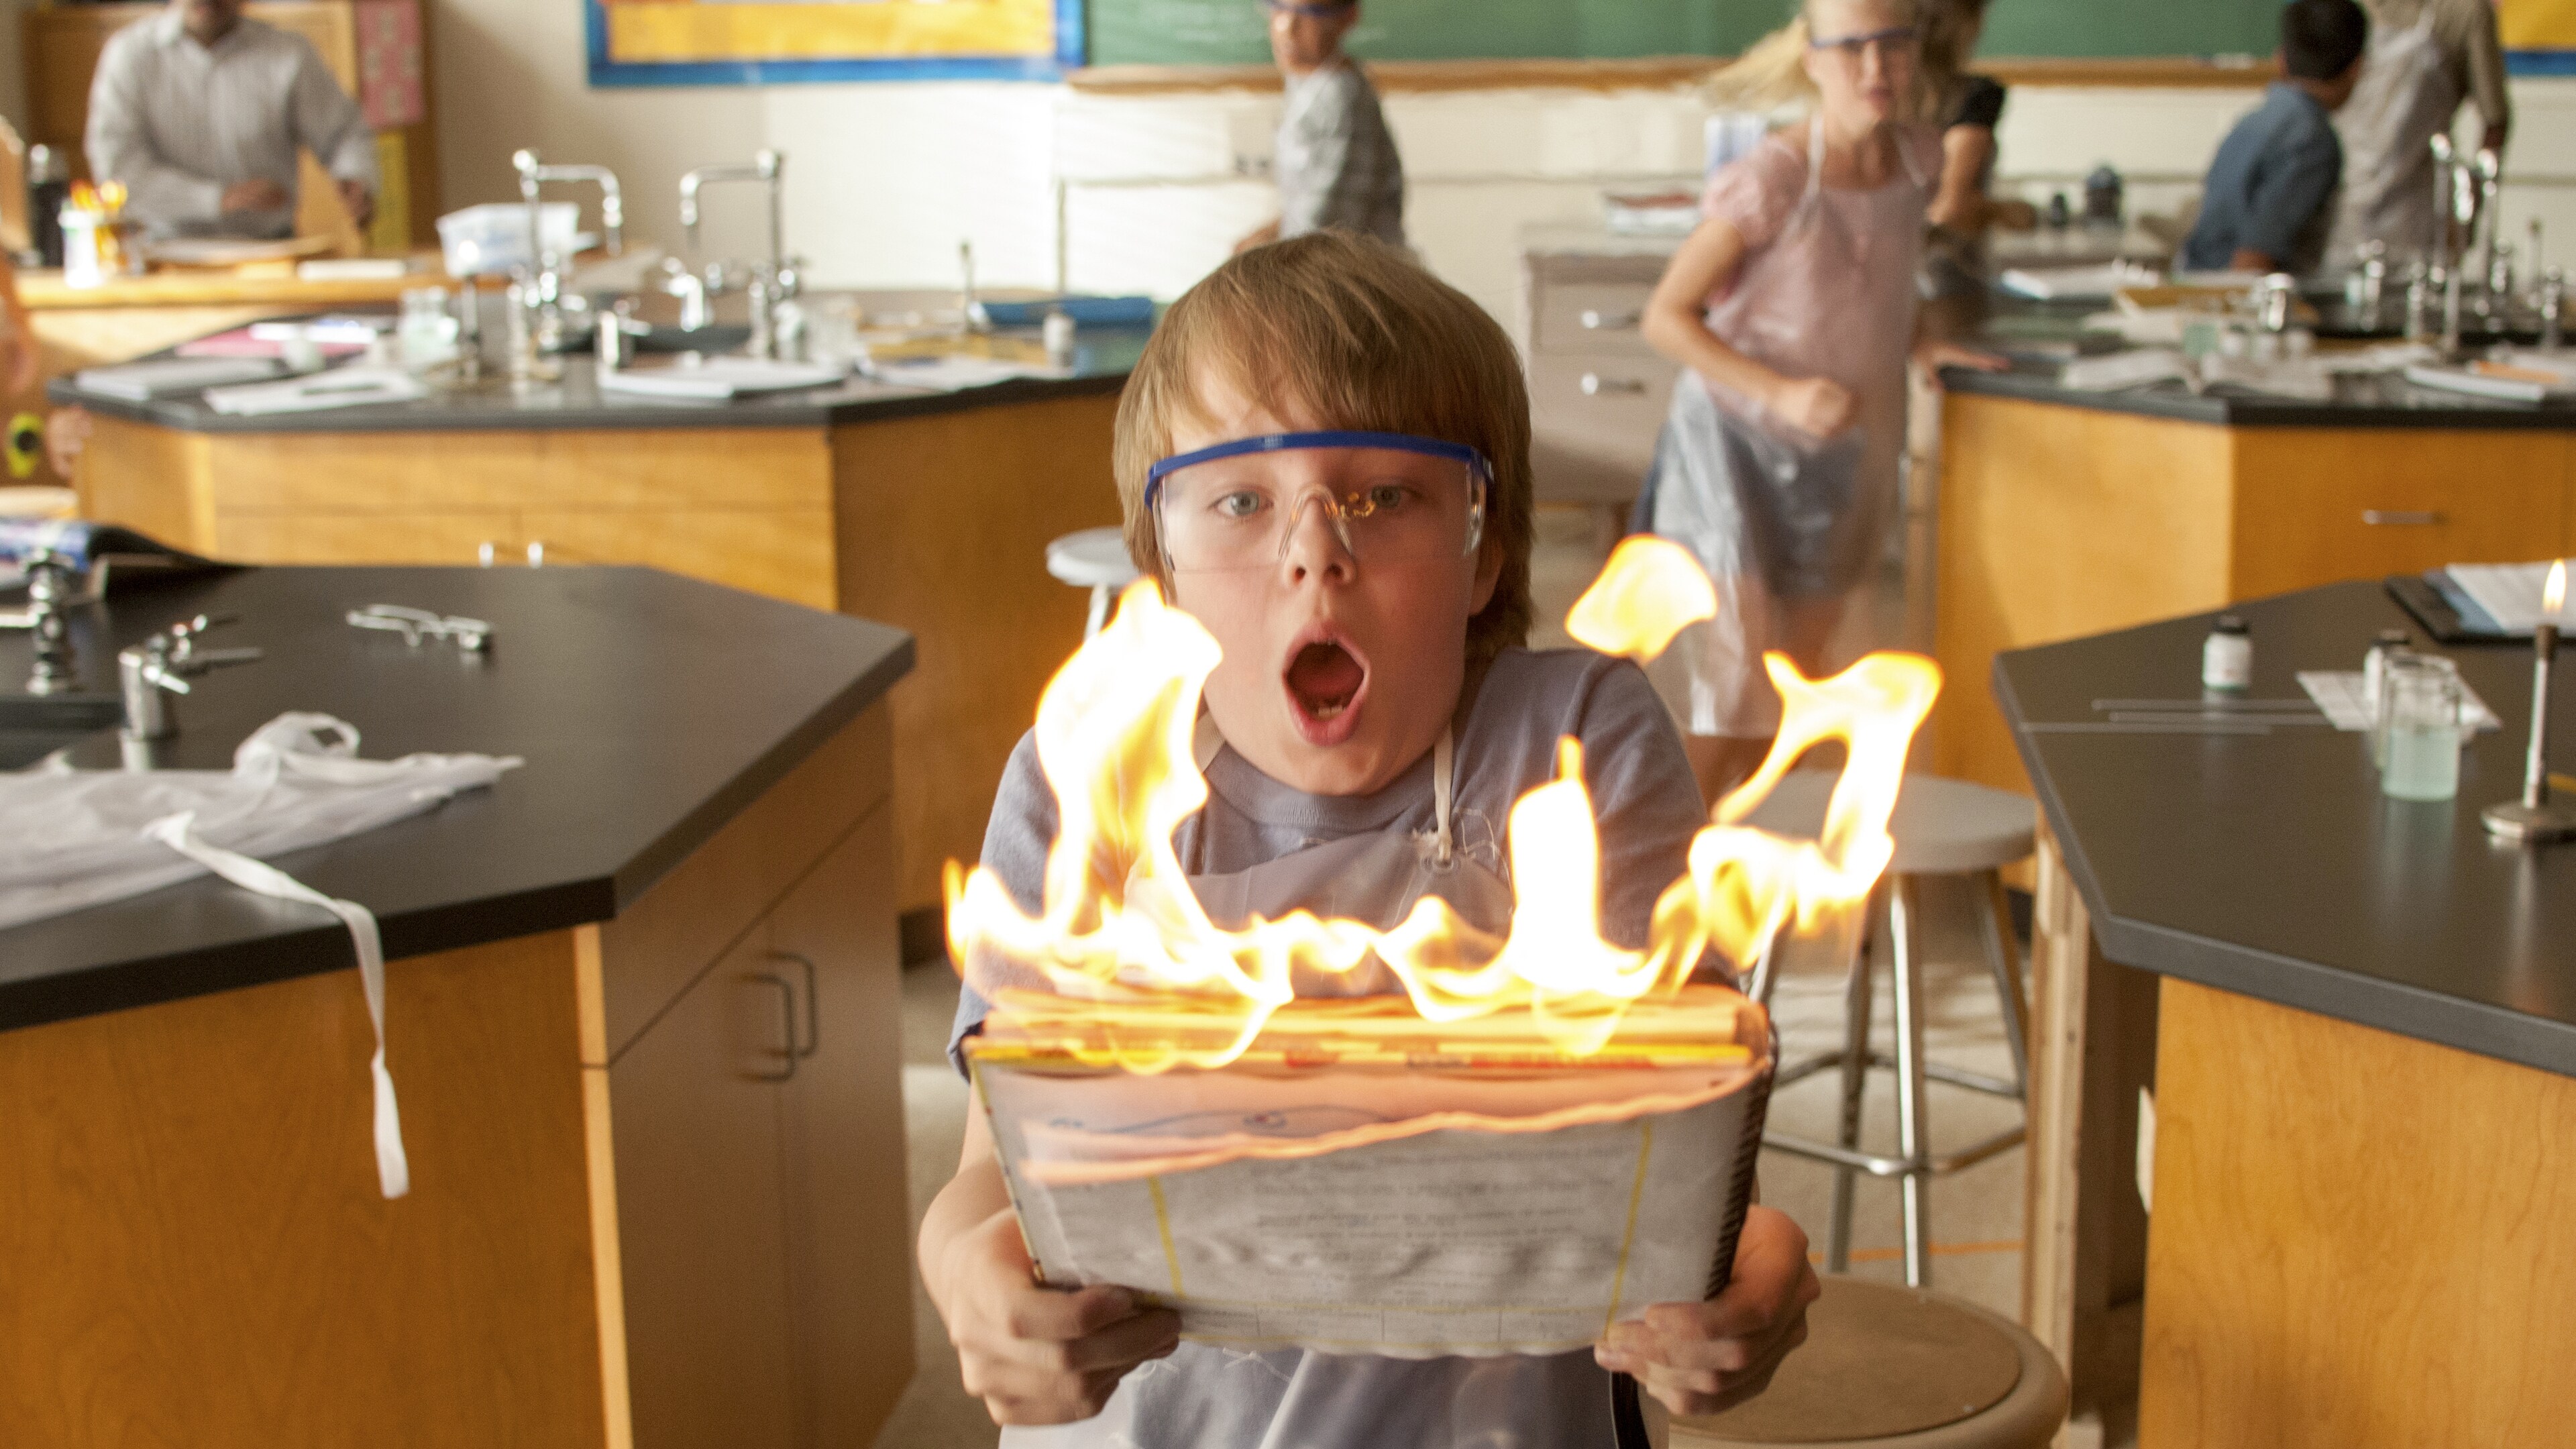 Ed Oxenbould as Alexander Cooper holding flaming paper in a classroom